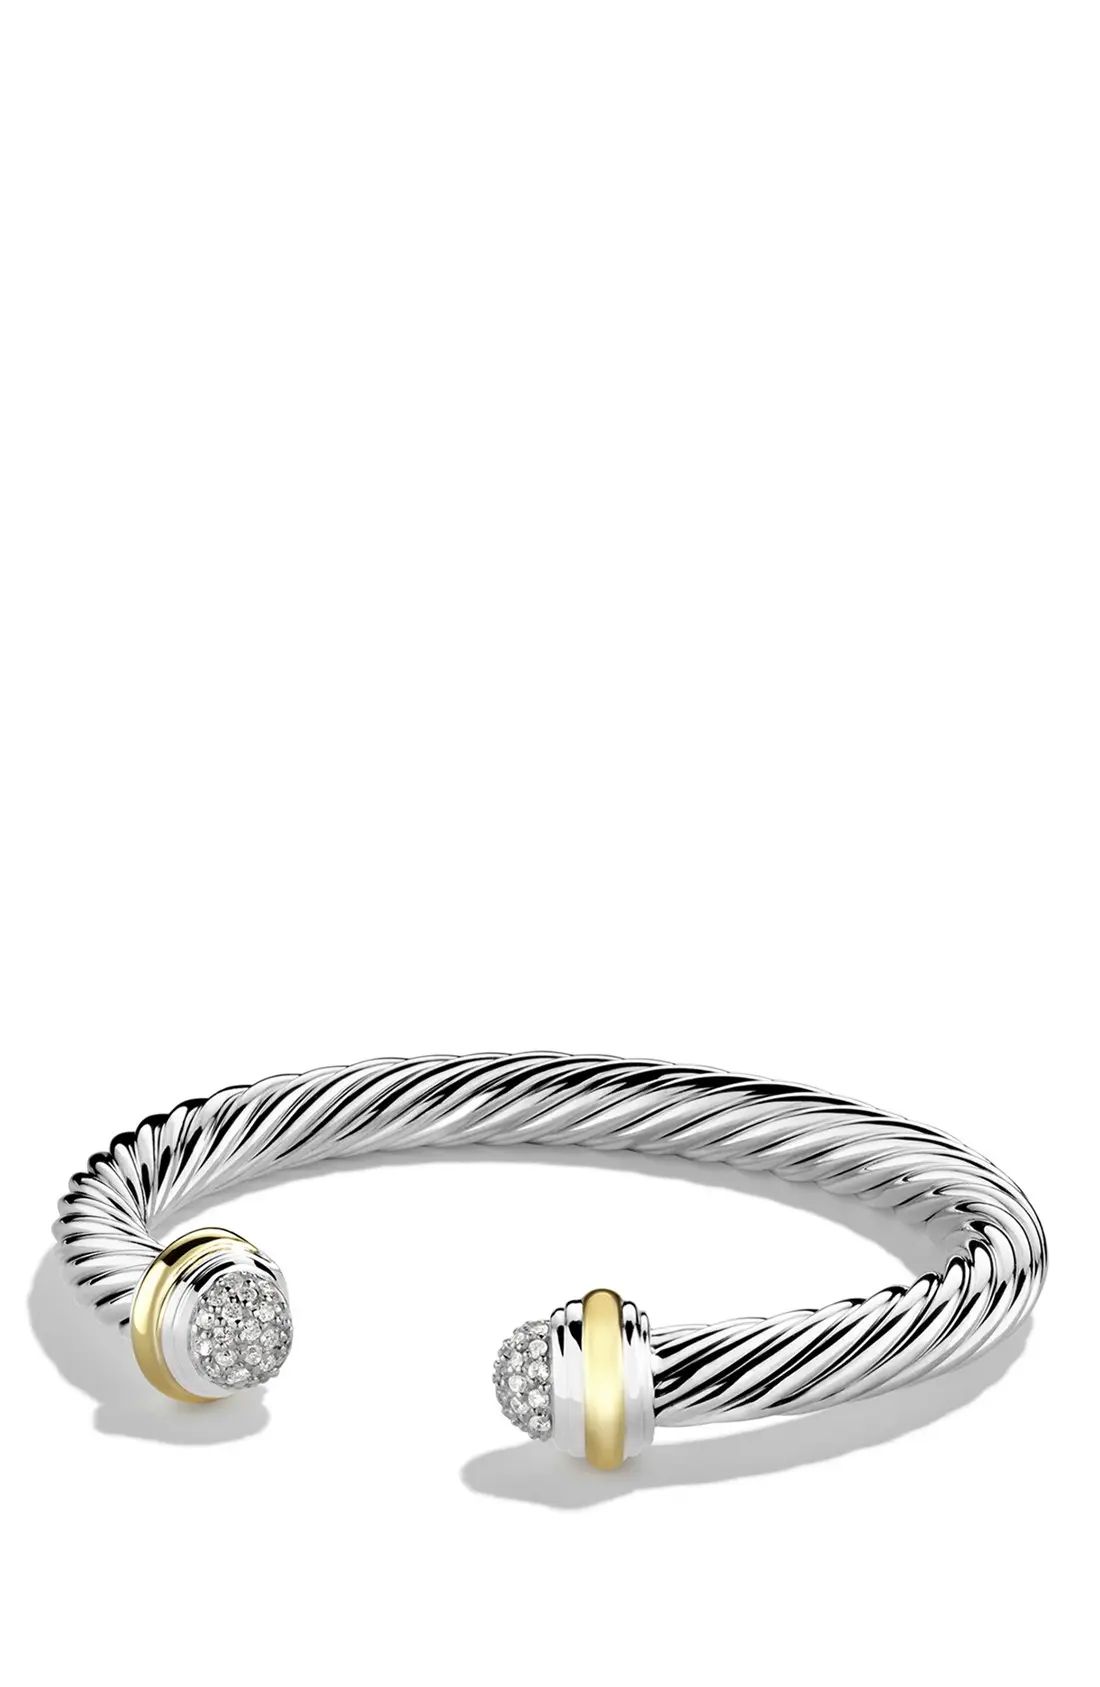 'Cable Classics' Bracelet with Diamonds and Gold | Nordstrom